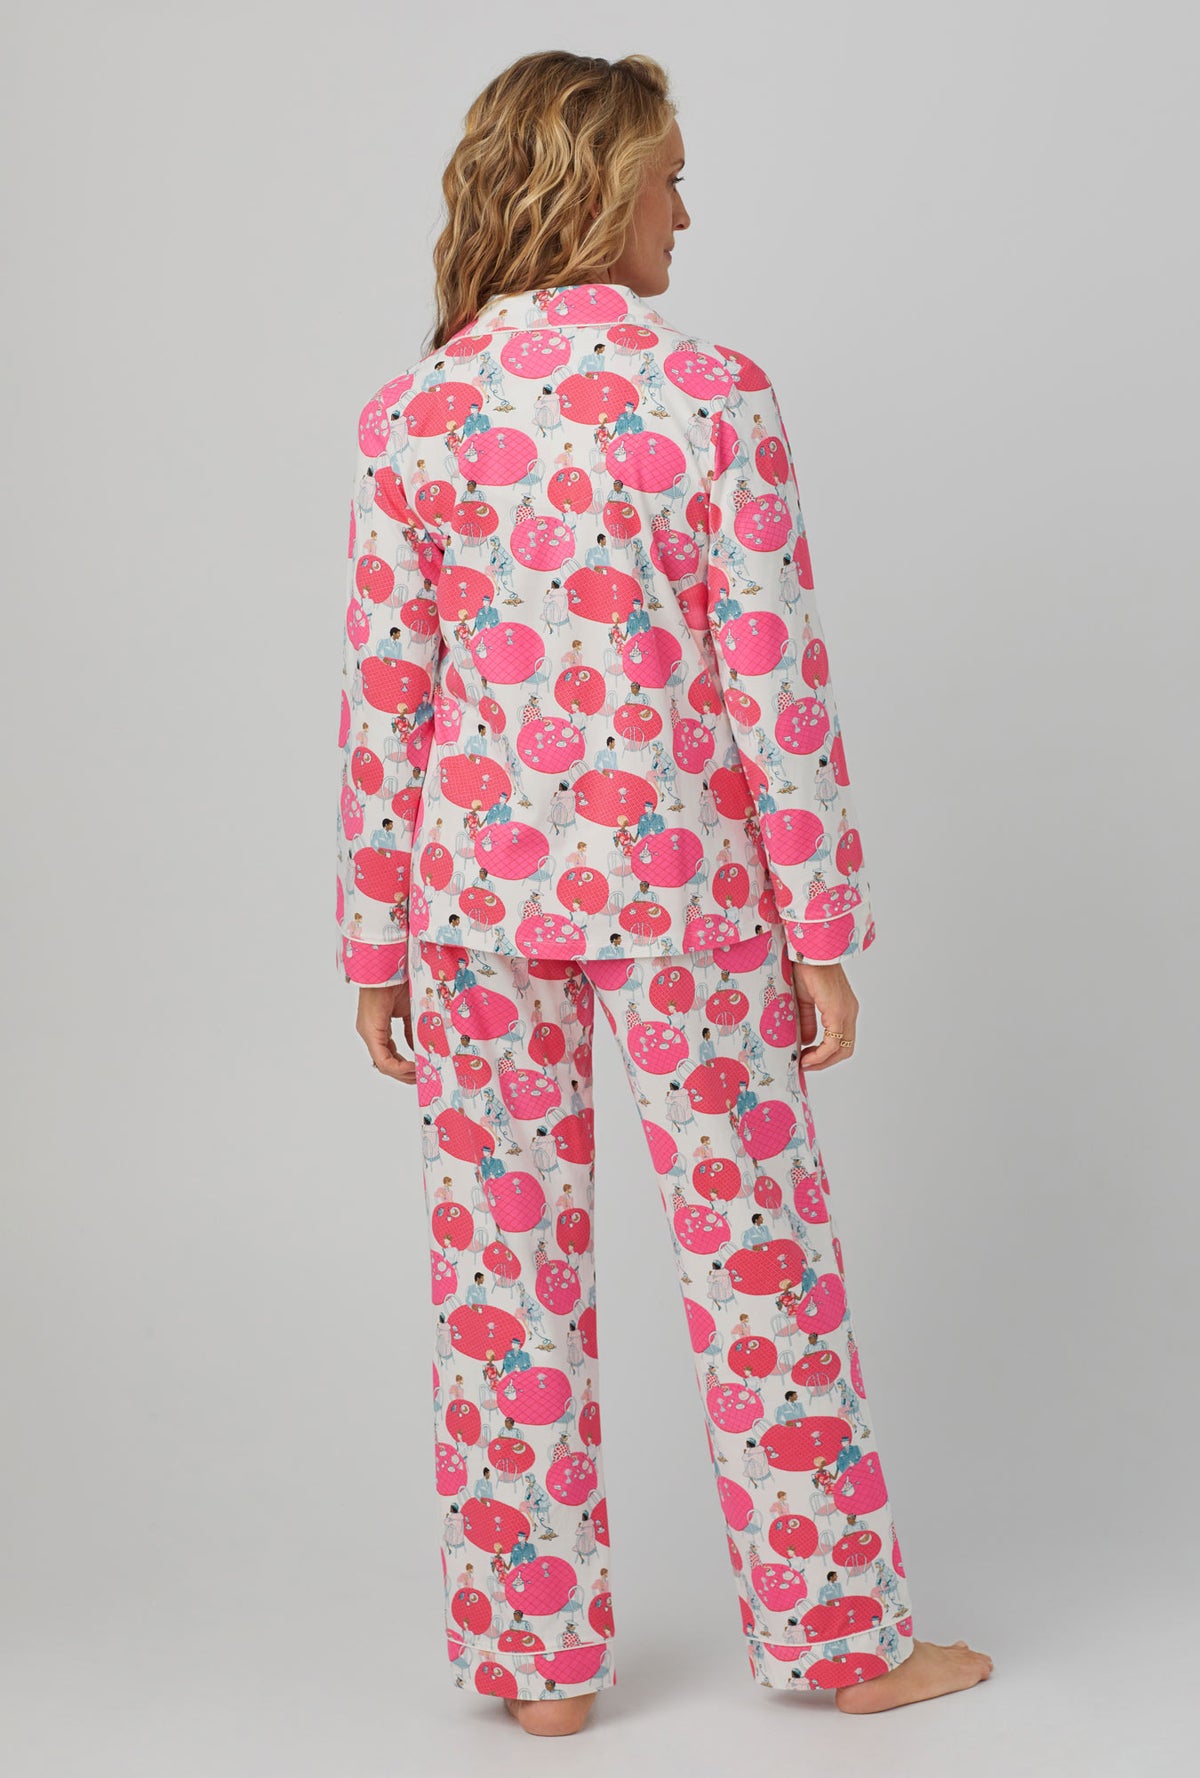 A lady wearing pink long sleeve classic stretch jersey pj set with sunday brunch print